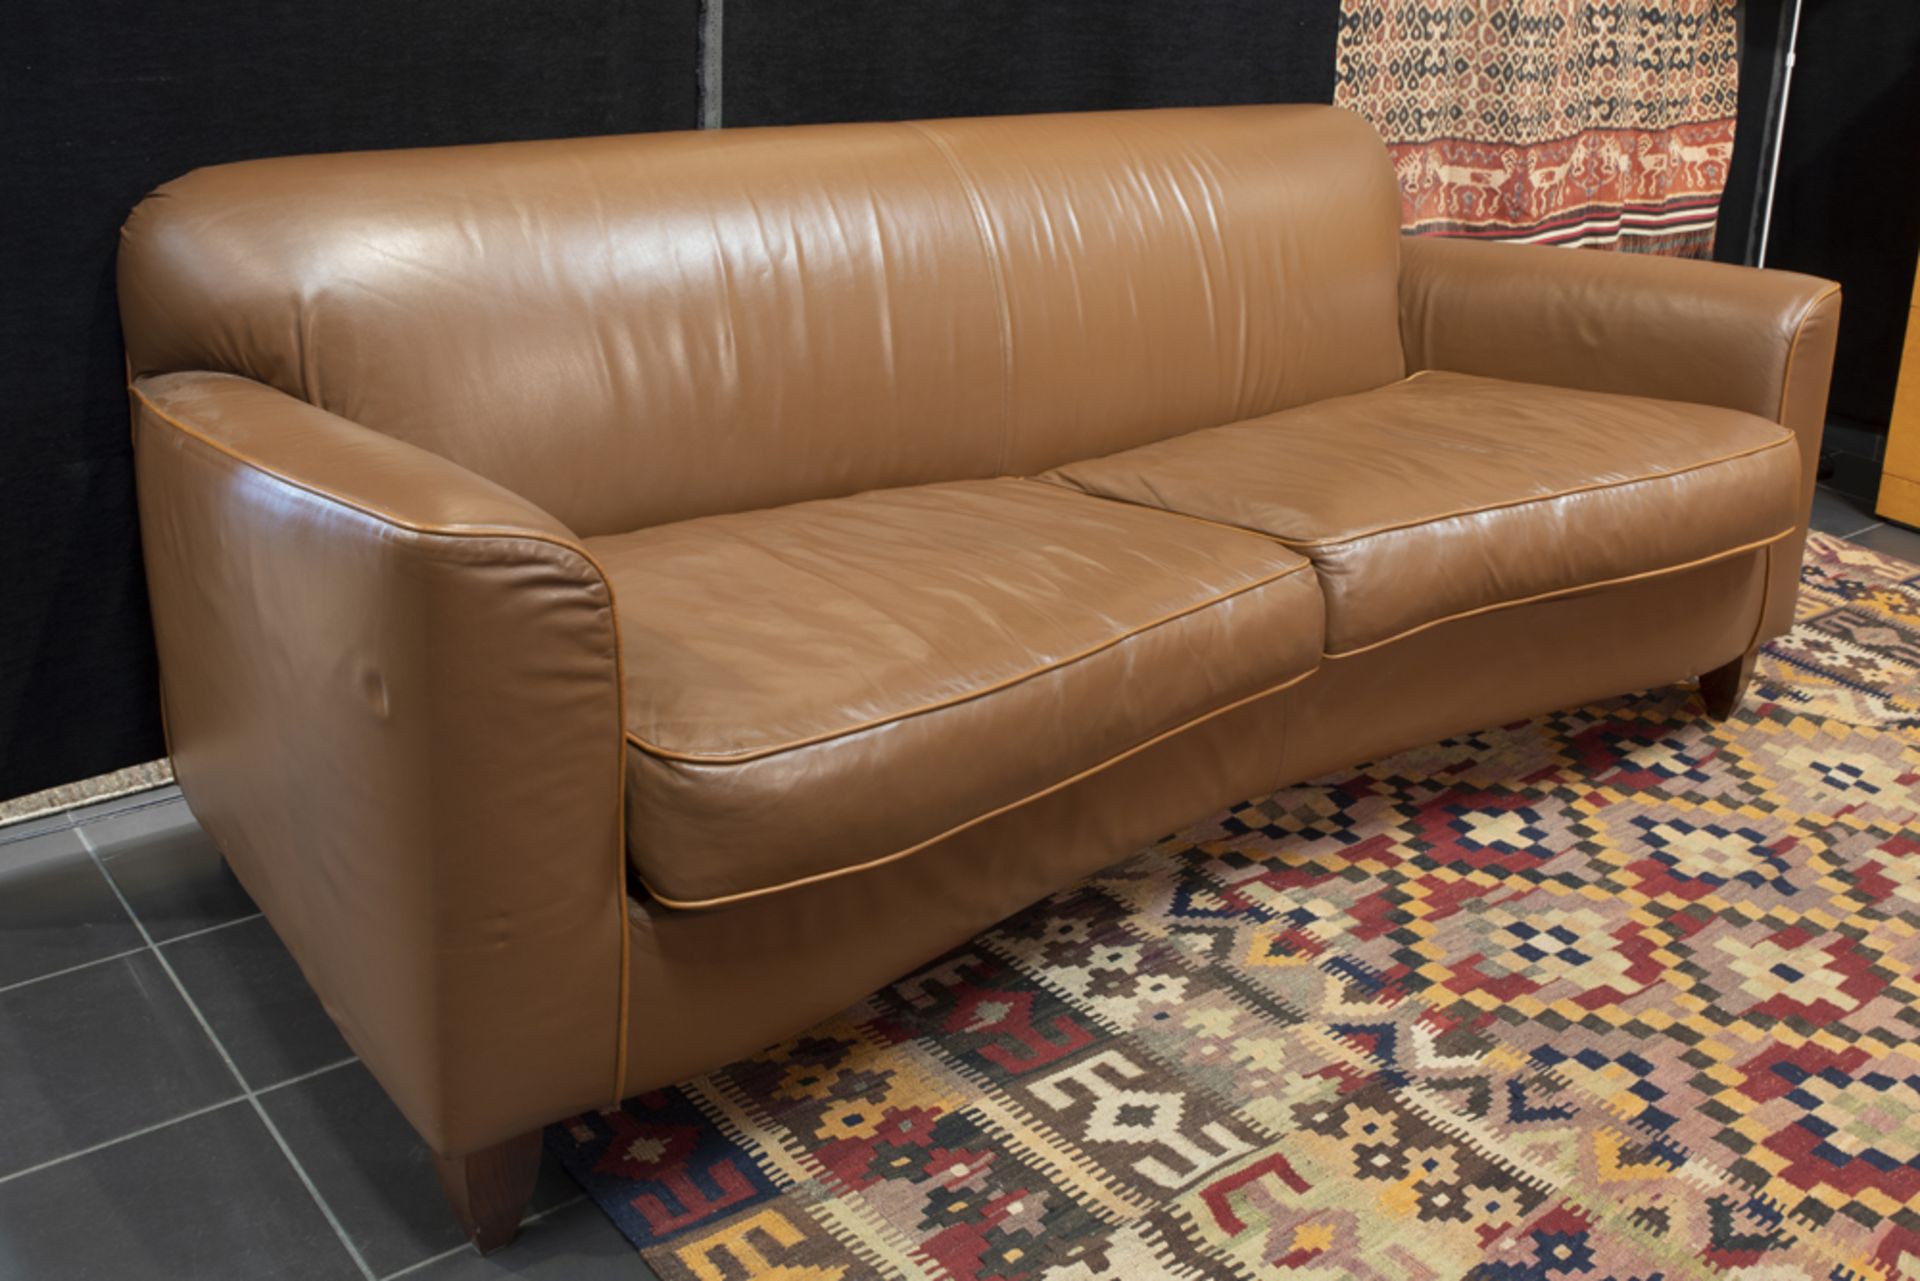 Italian Giorgetti marked set of a leather sofa and a coffeetable with a design by Leon Krier|| - Image 4 of 5